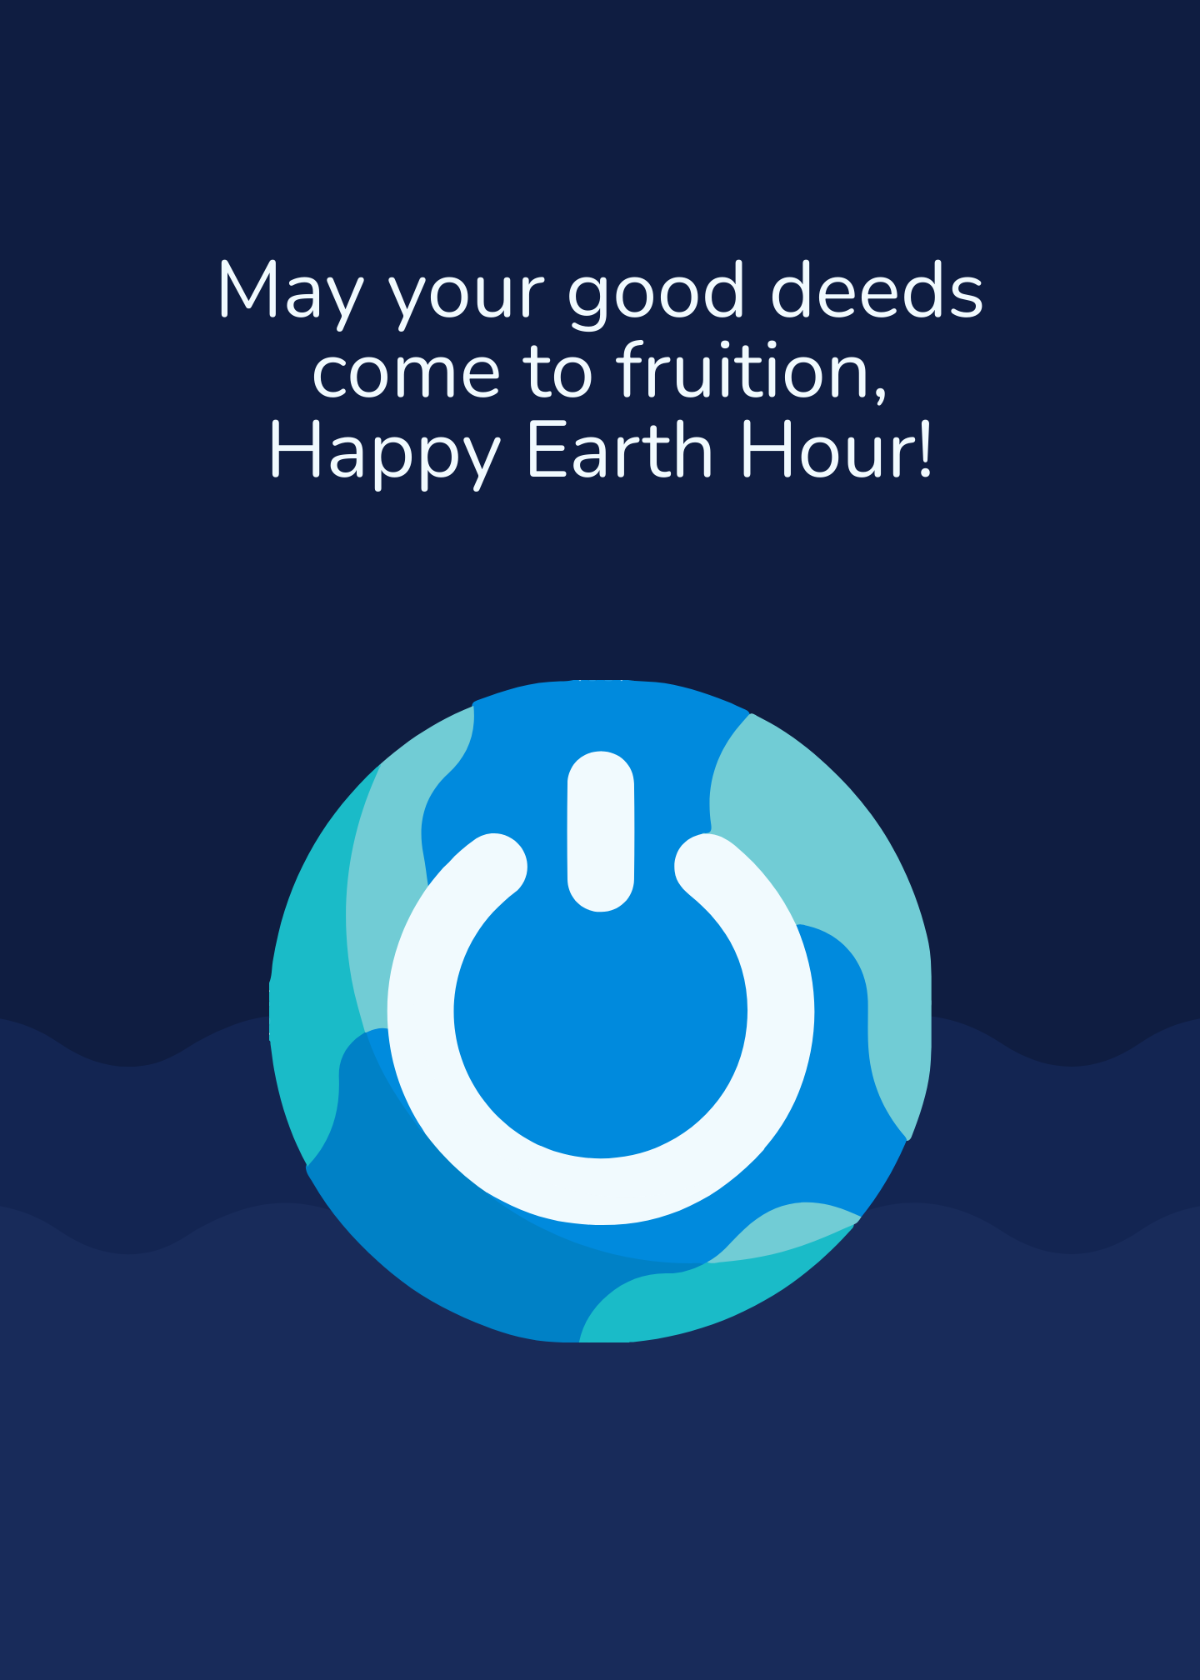 Free Earth Hour Best Wishes Template